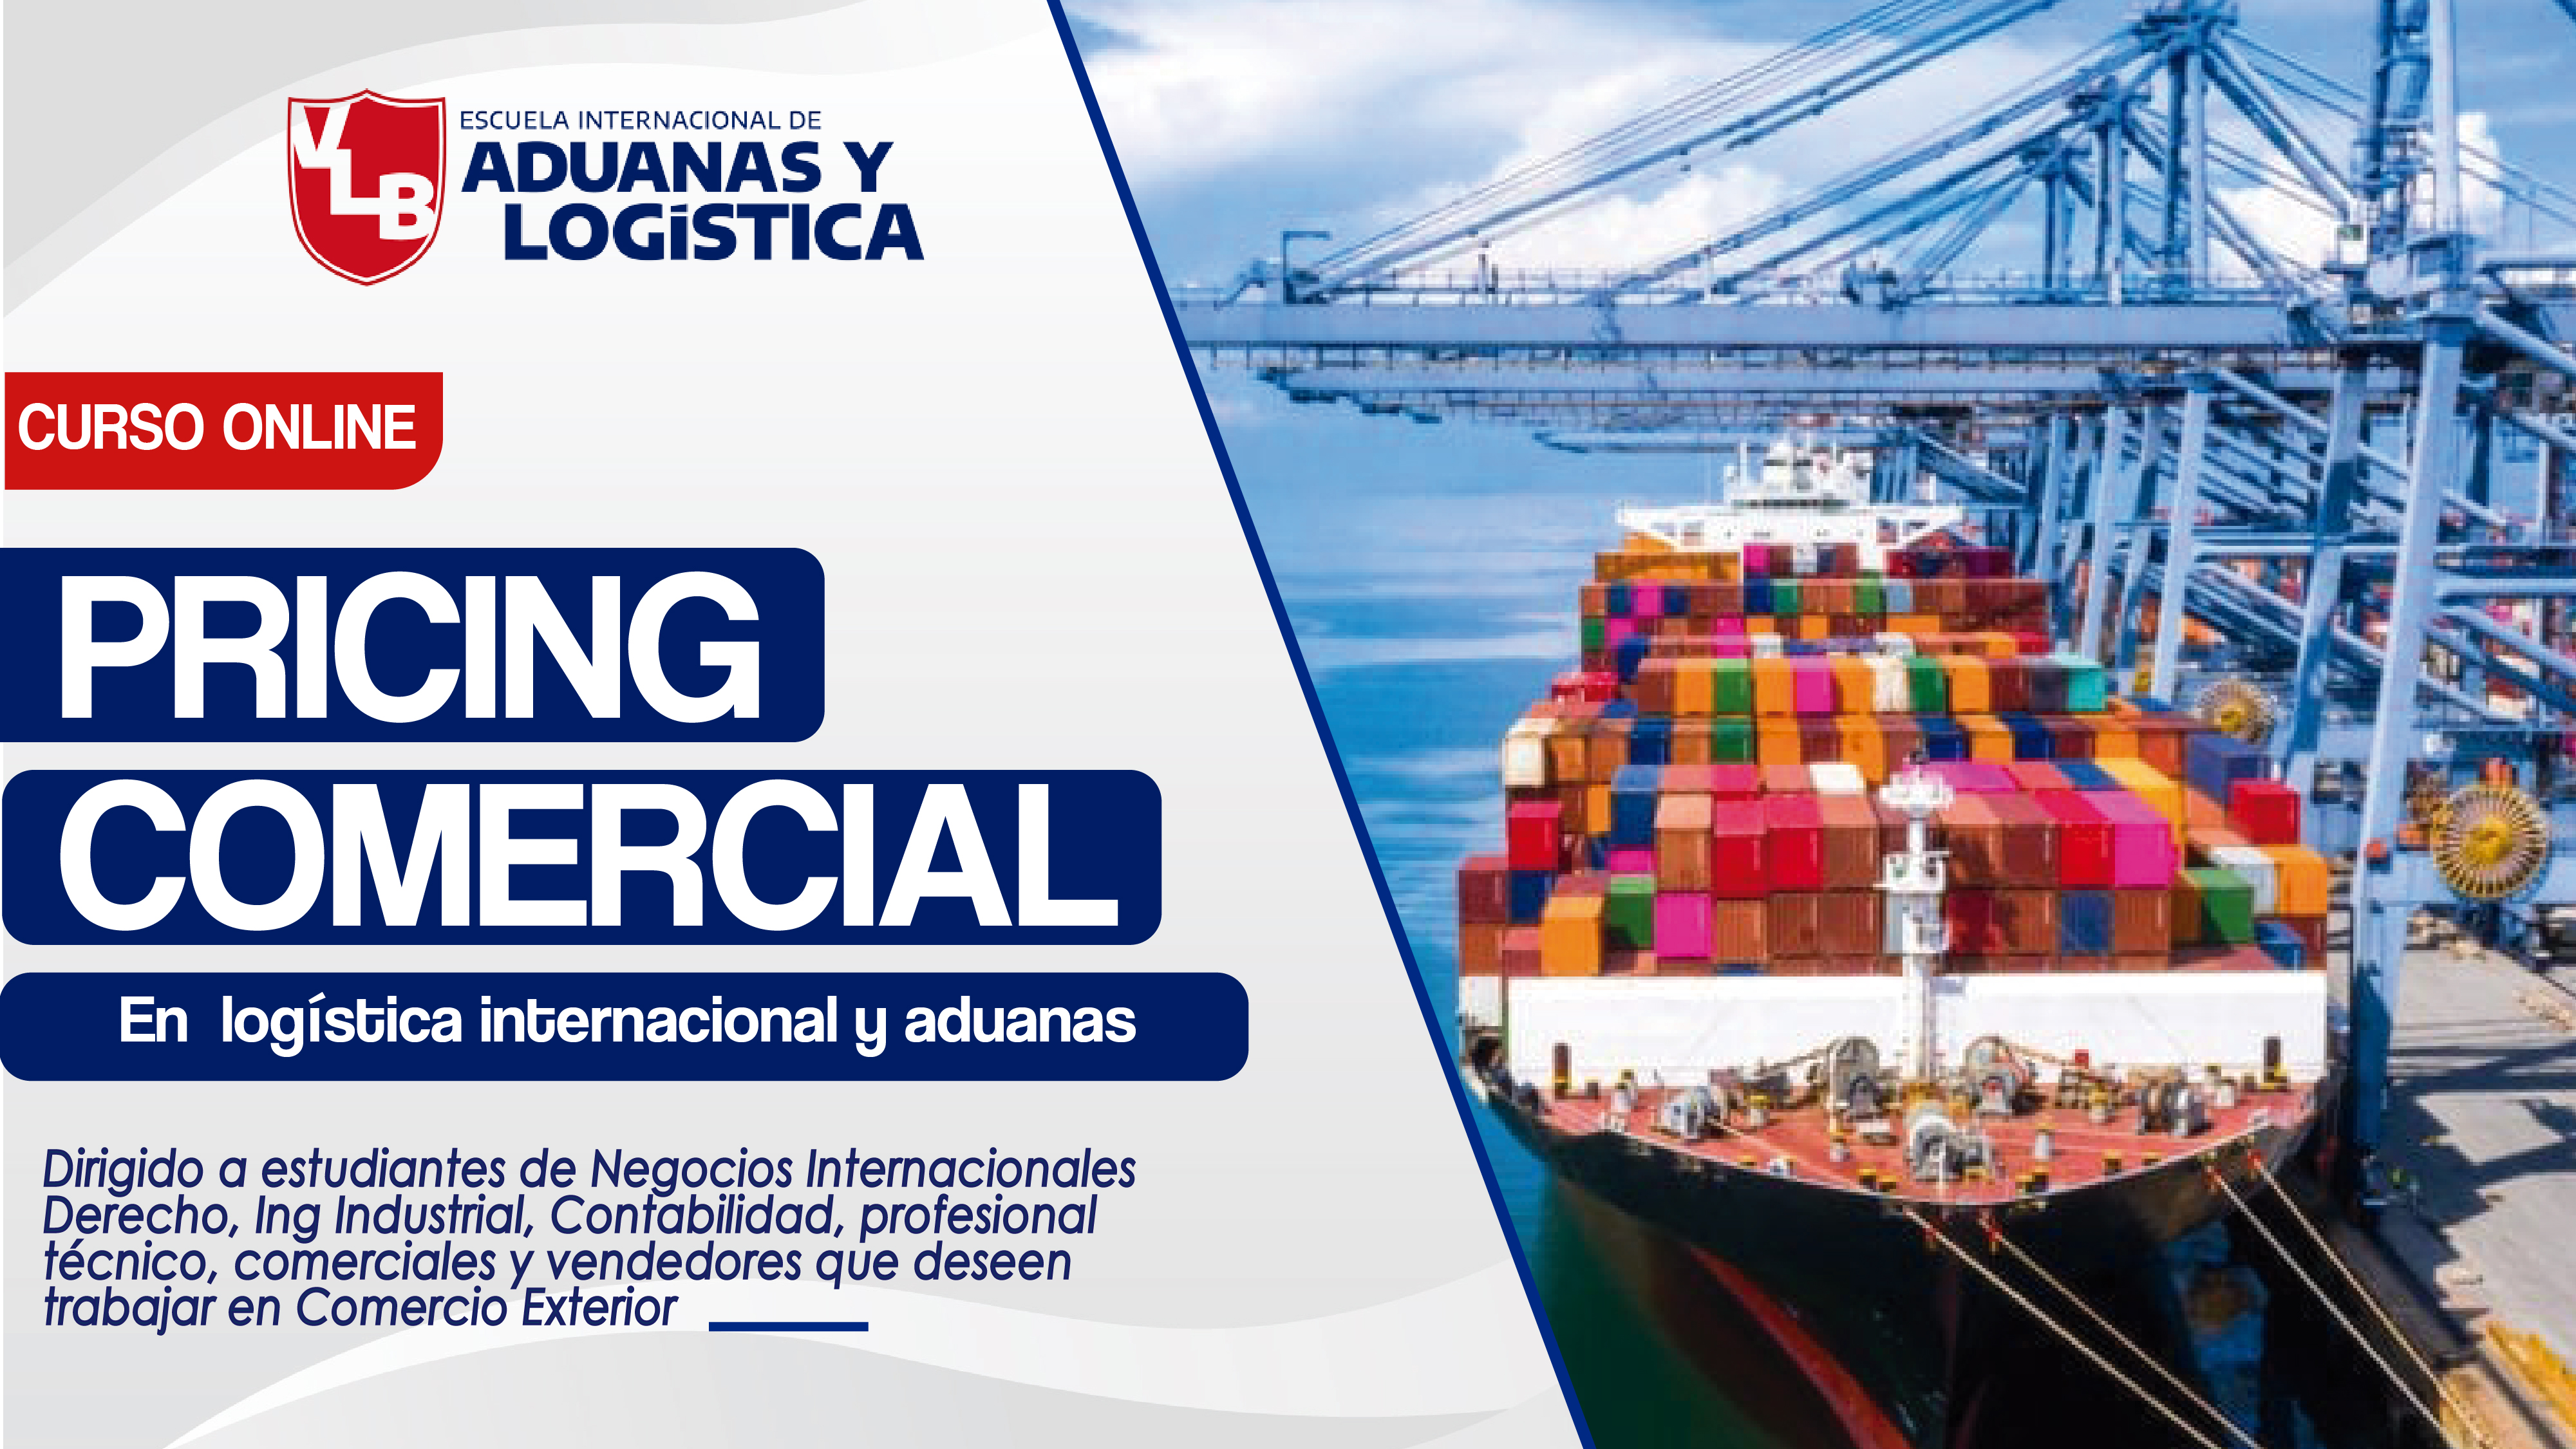 PRICING COMERCIAL 03-11-2022